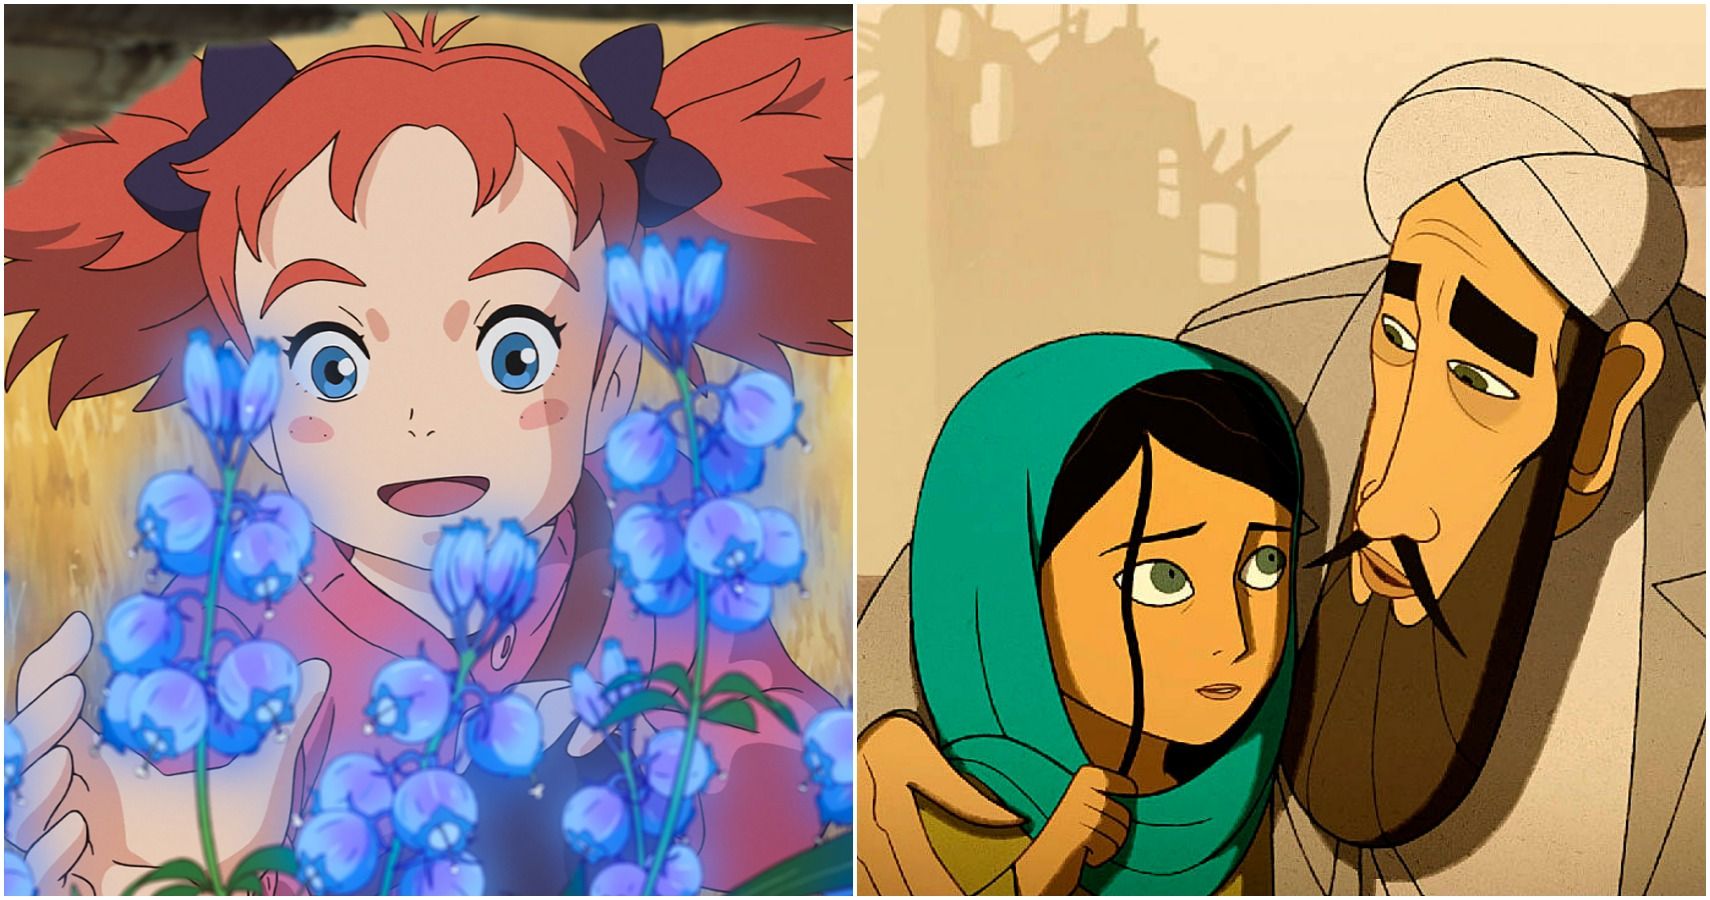 According to Rotten Tomatoes, These are the 30 Best Animated Films